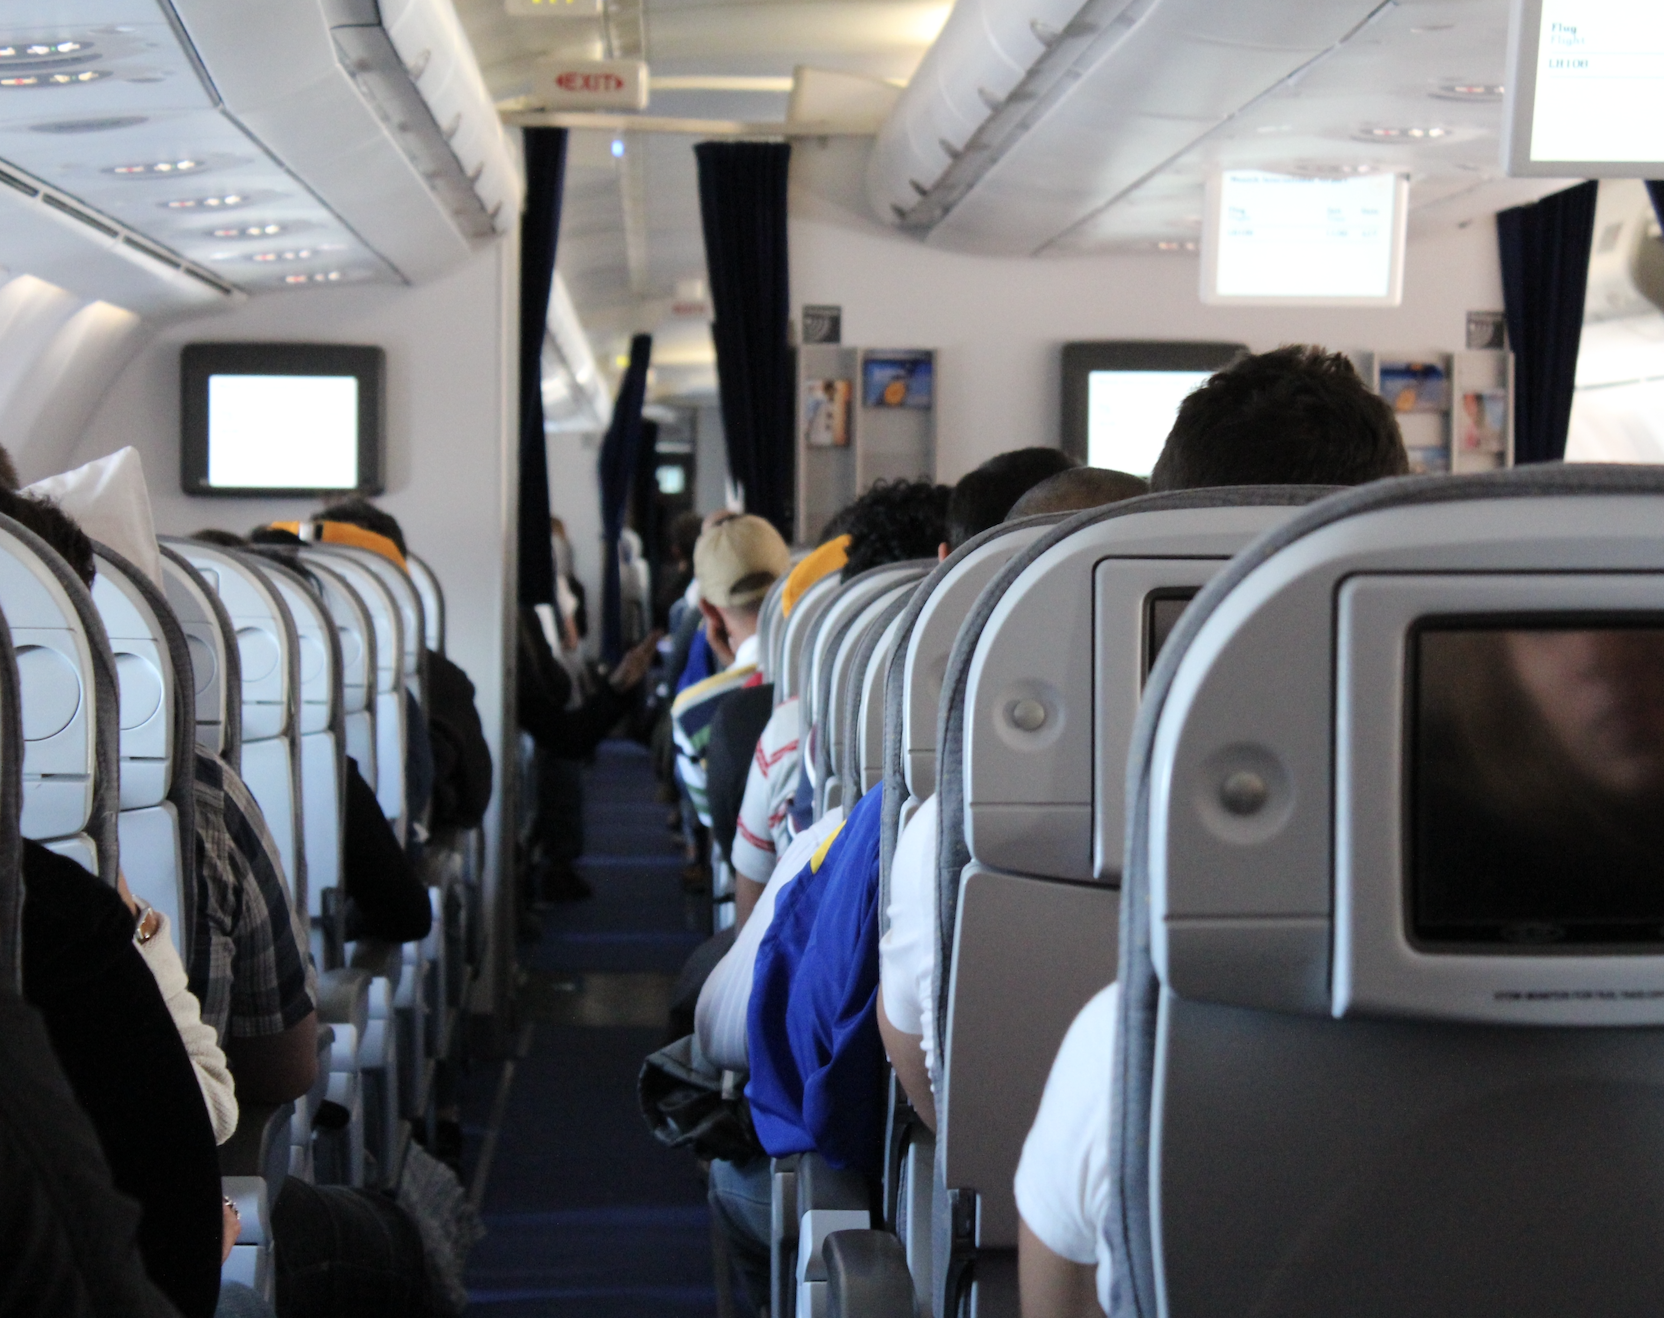 Passengers seated in an airplane cabin, some watching overhead screens